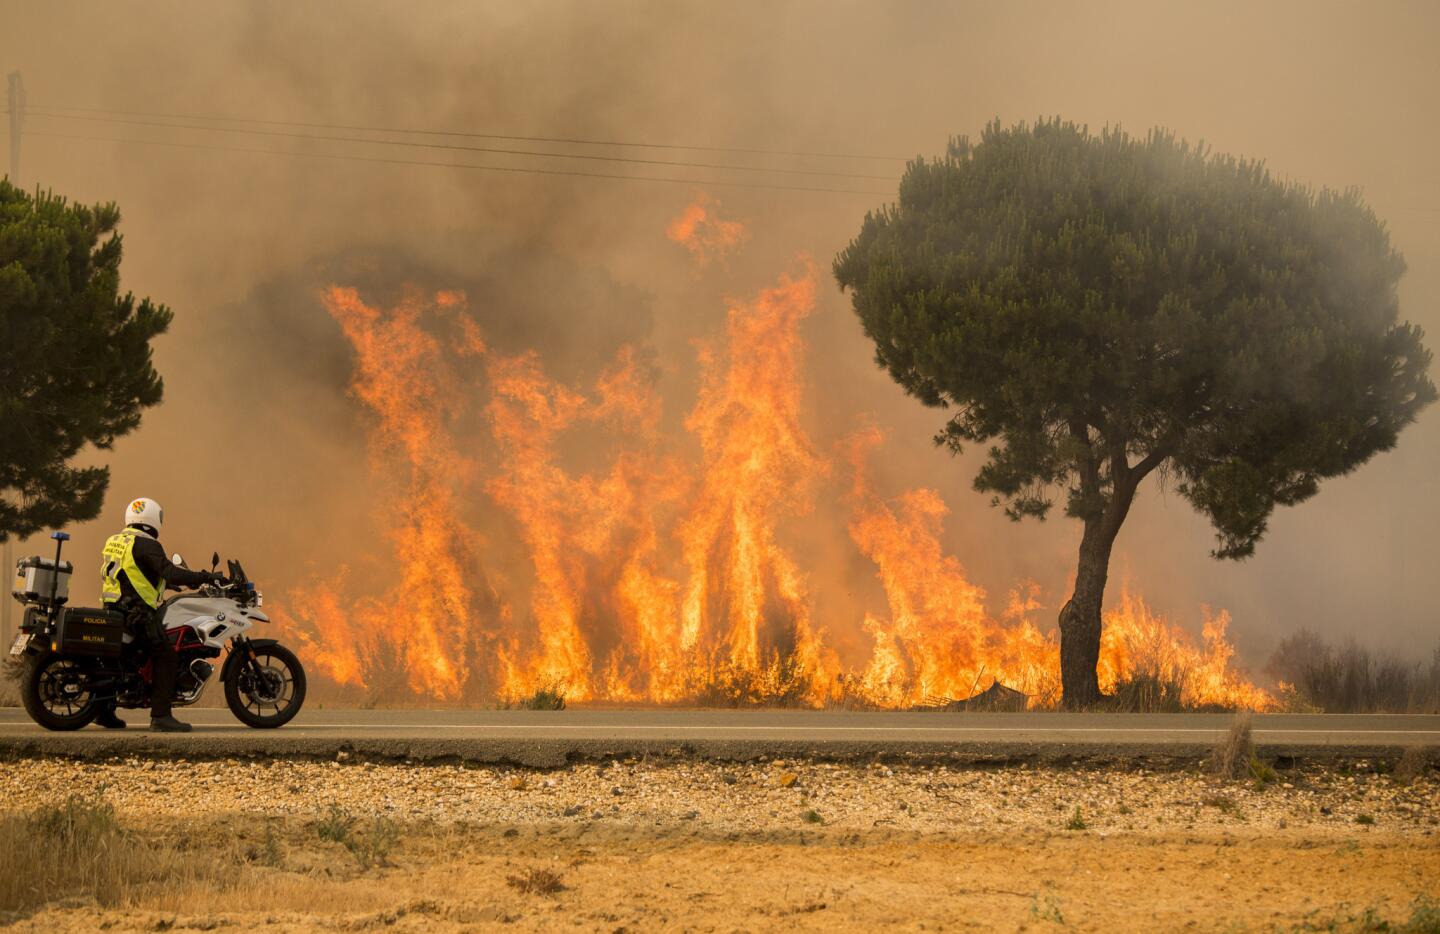 A military police officer stands by his motorcycle next to flames from a forest fire near Mazagon in southern Spain on June 25, 2017.